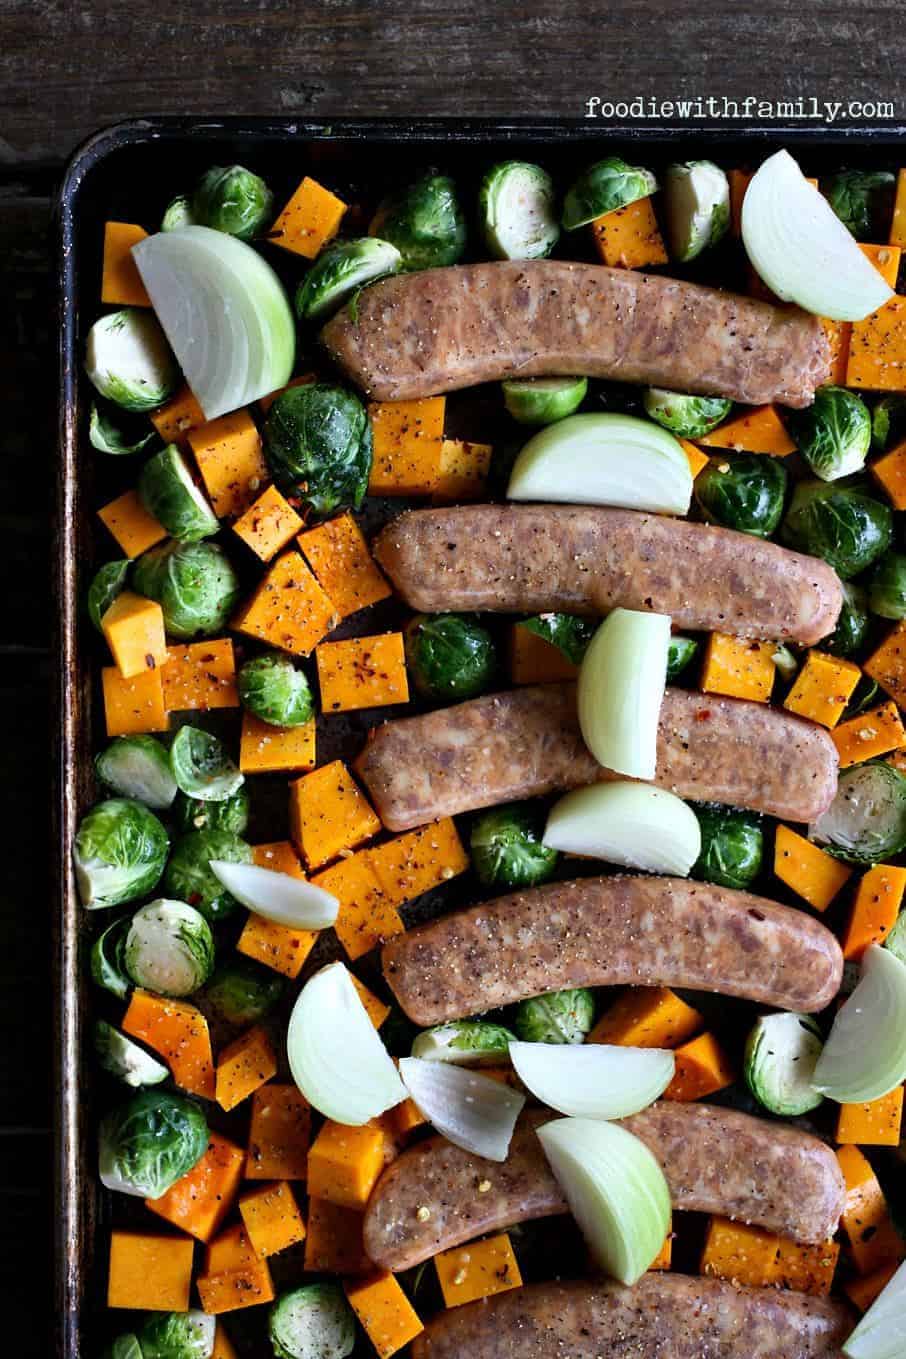 Roasted Fall Vegetable and Italian Sausage Sheet Pan Meal 2